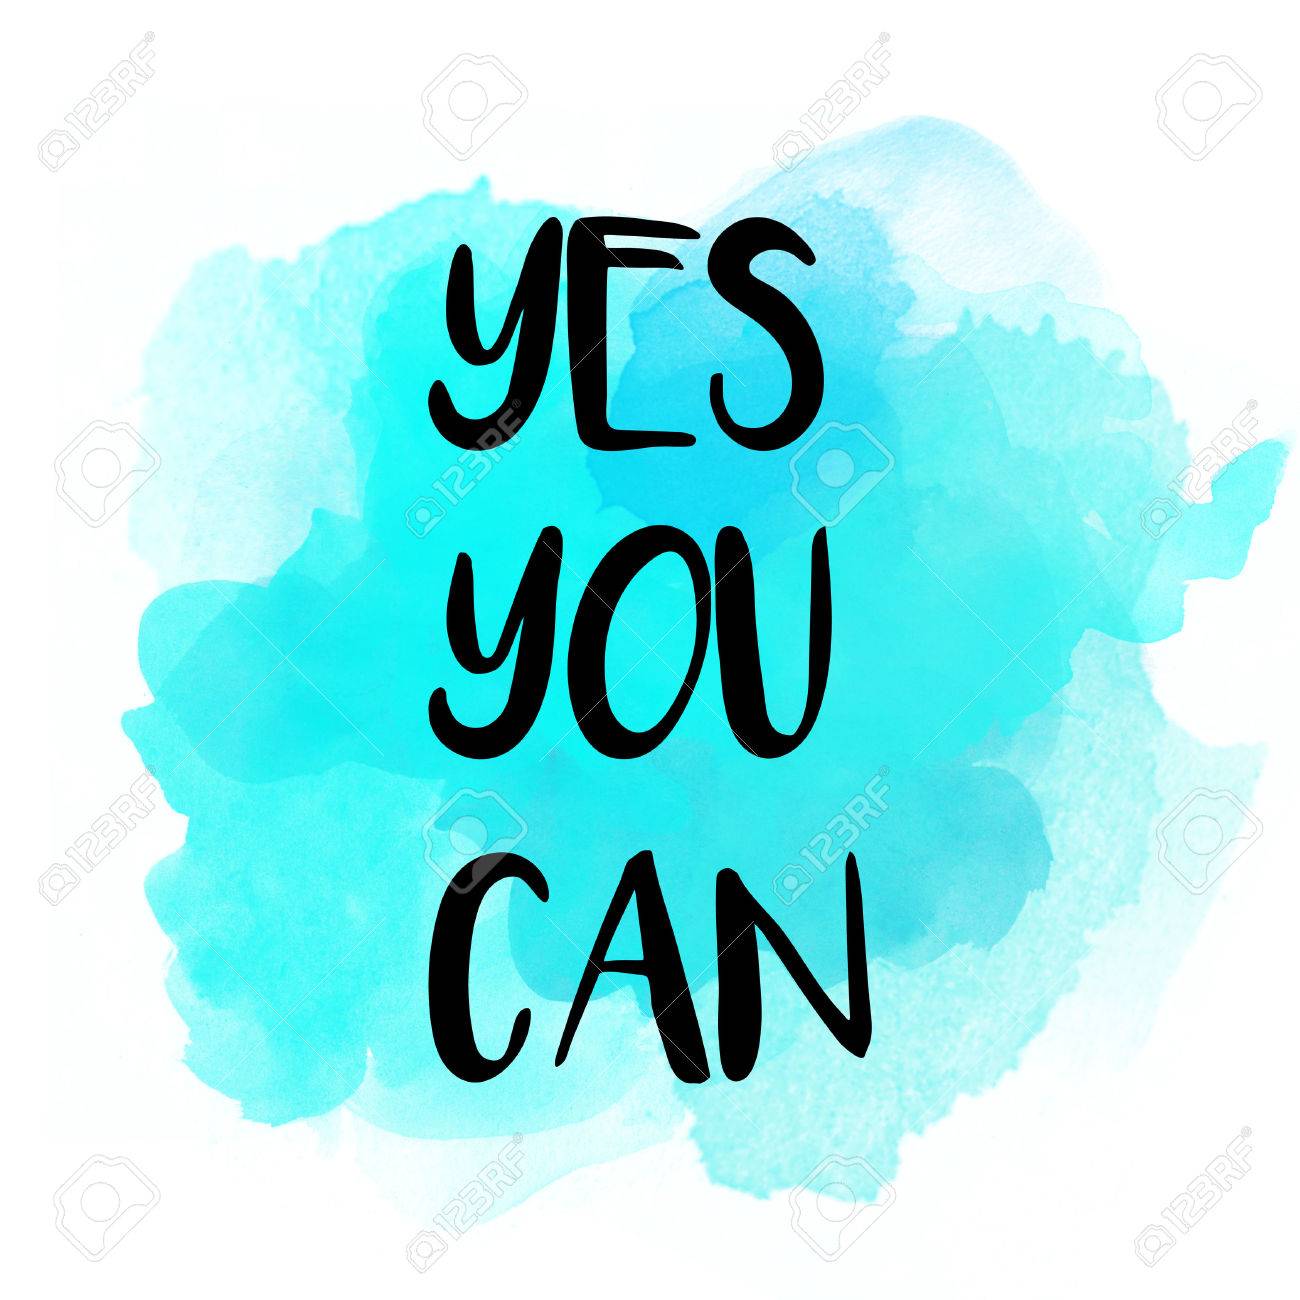 Yes you can use the. Yes you can картинка. Картина Yes you can. Векторное изображение Yes you can. Фоновые картинки Yes you can.